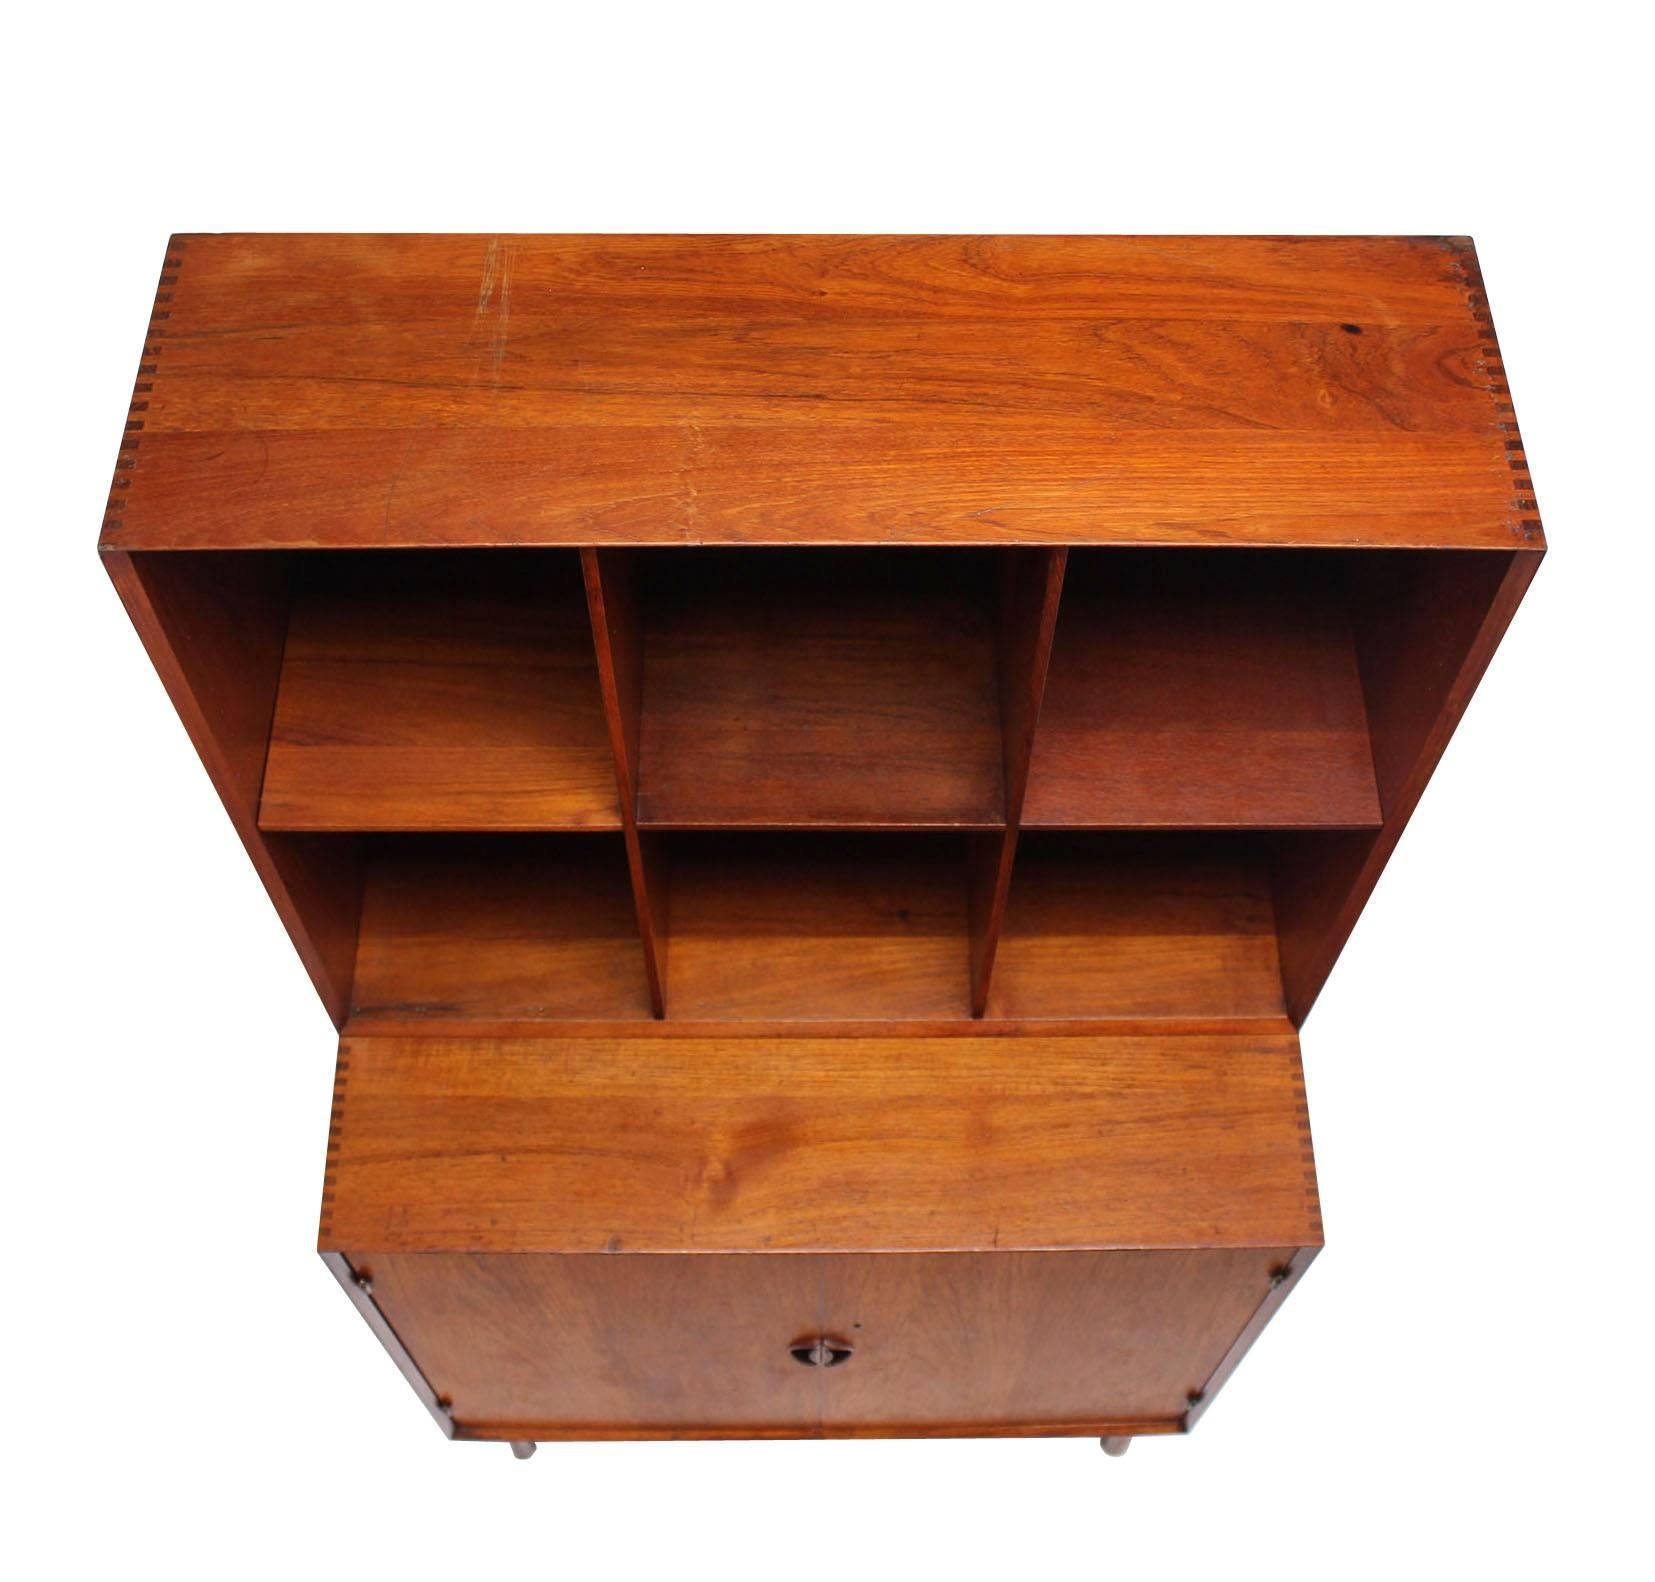 20th Century Peter Hvidt Solid Teak Bookcase Two Doors Chest of Drawers Cabinet Dowel Legs For Sale